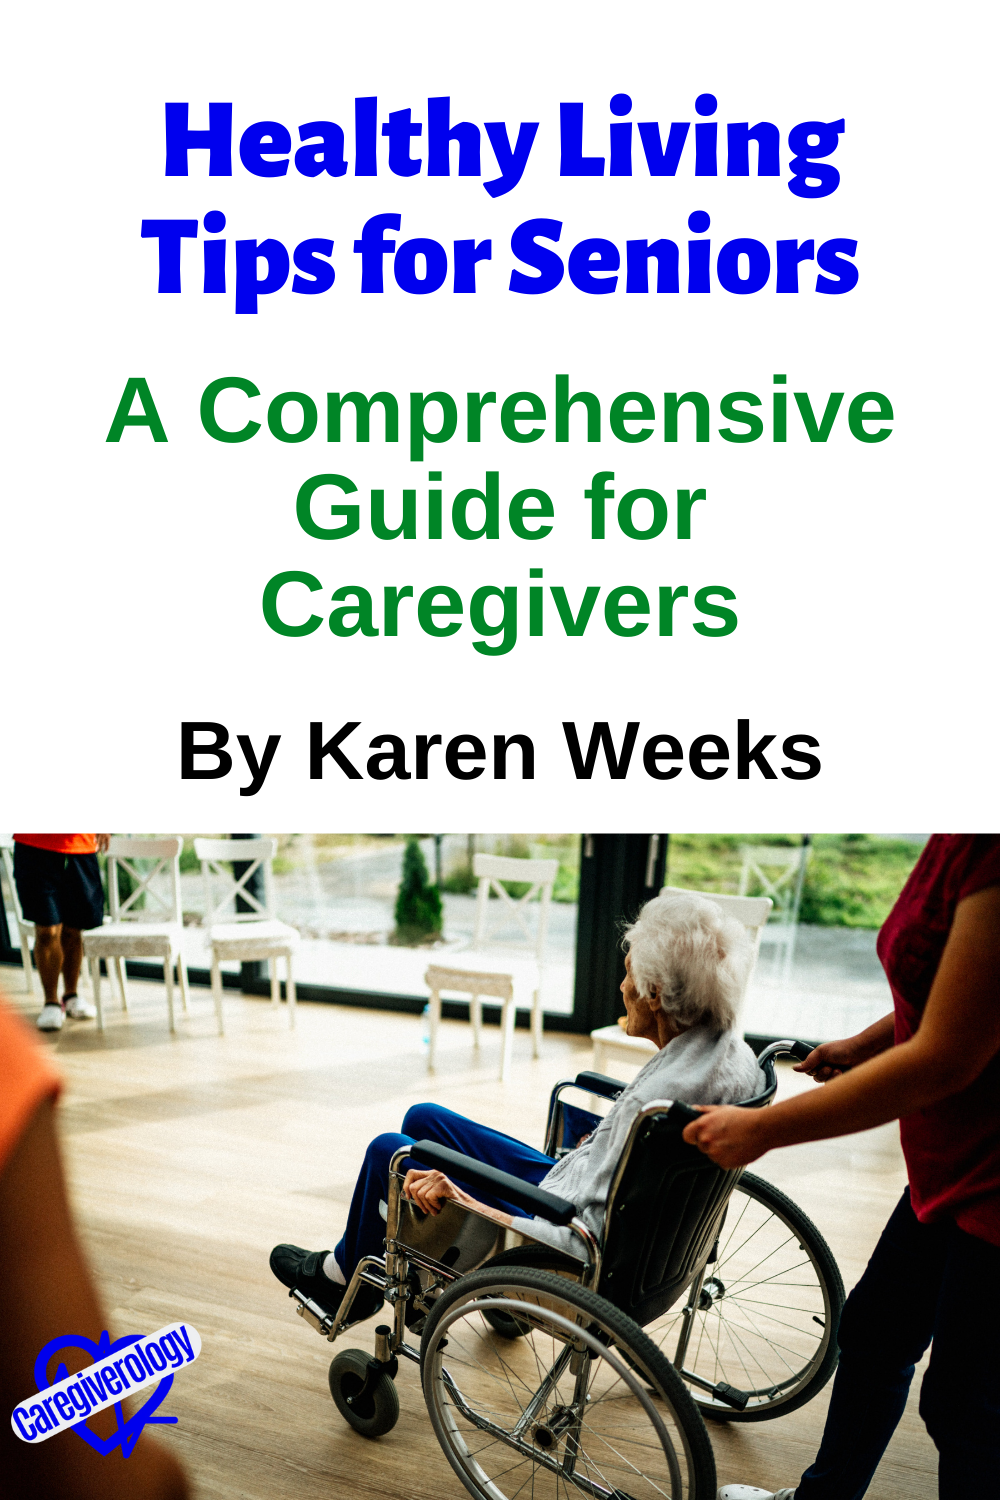 Healthy Living Tips for Seniors: A Comprehensive Guide for Caregivers